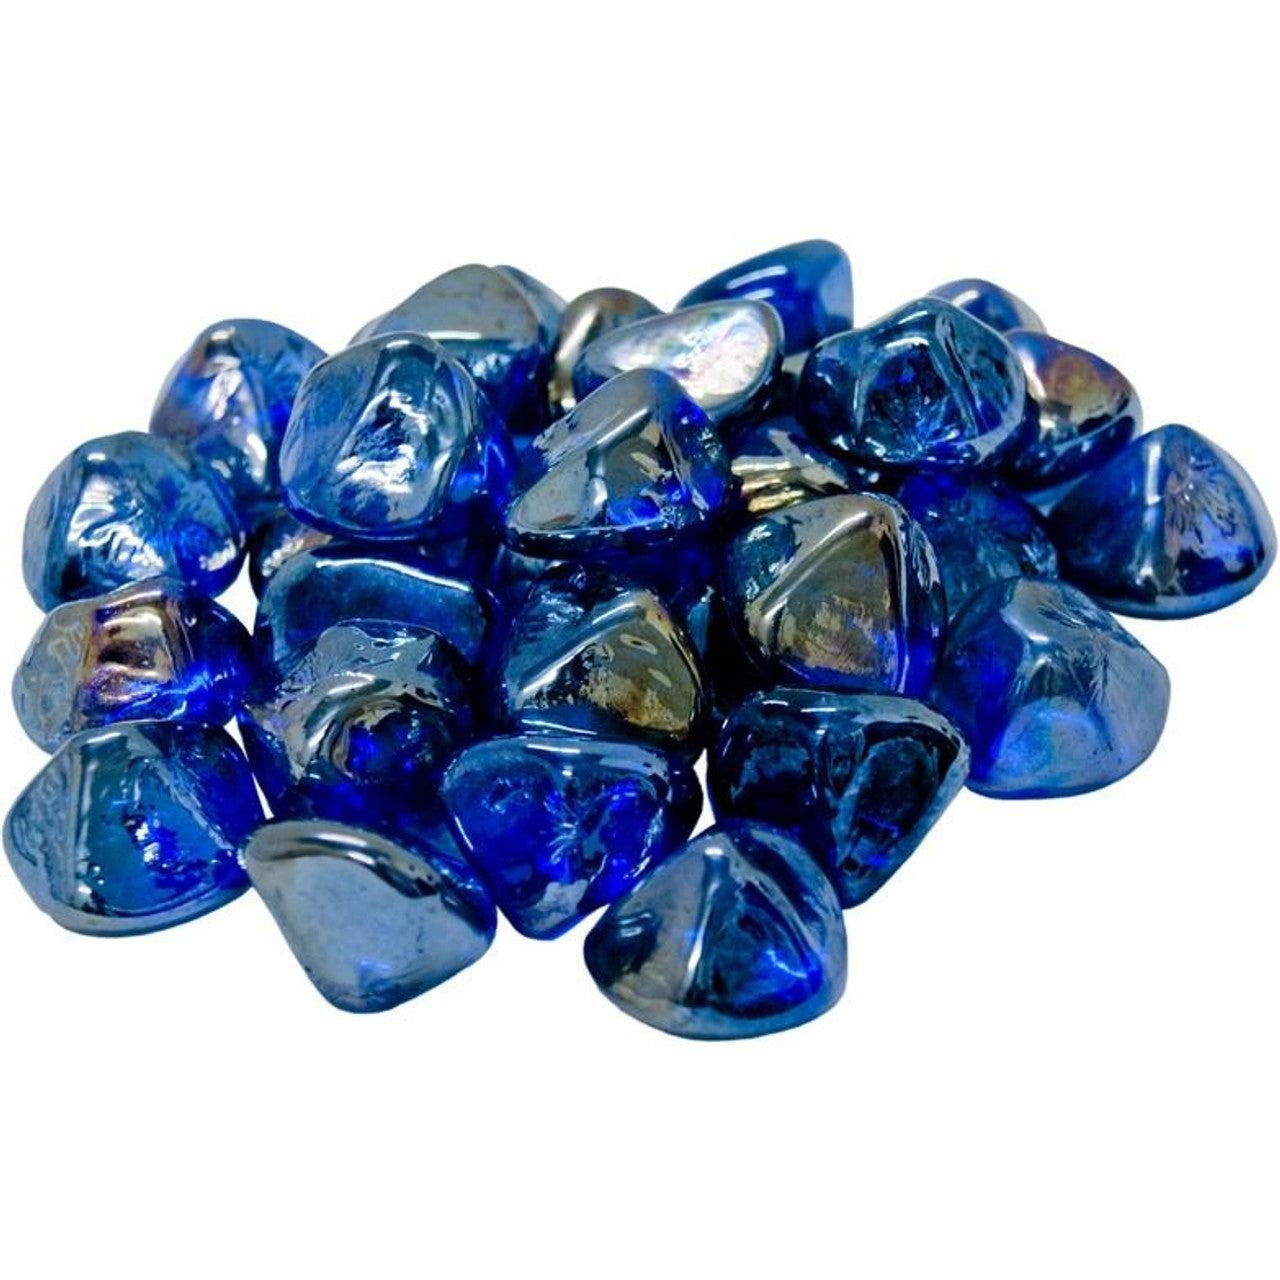 40 lb. Package of Diamond Nuggets Glass Media